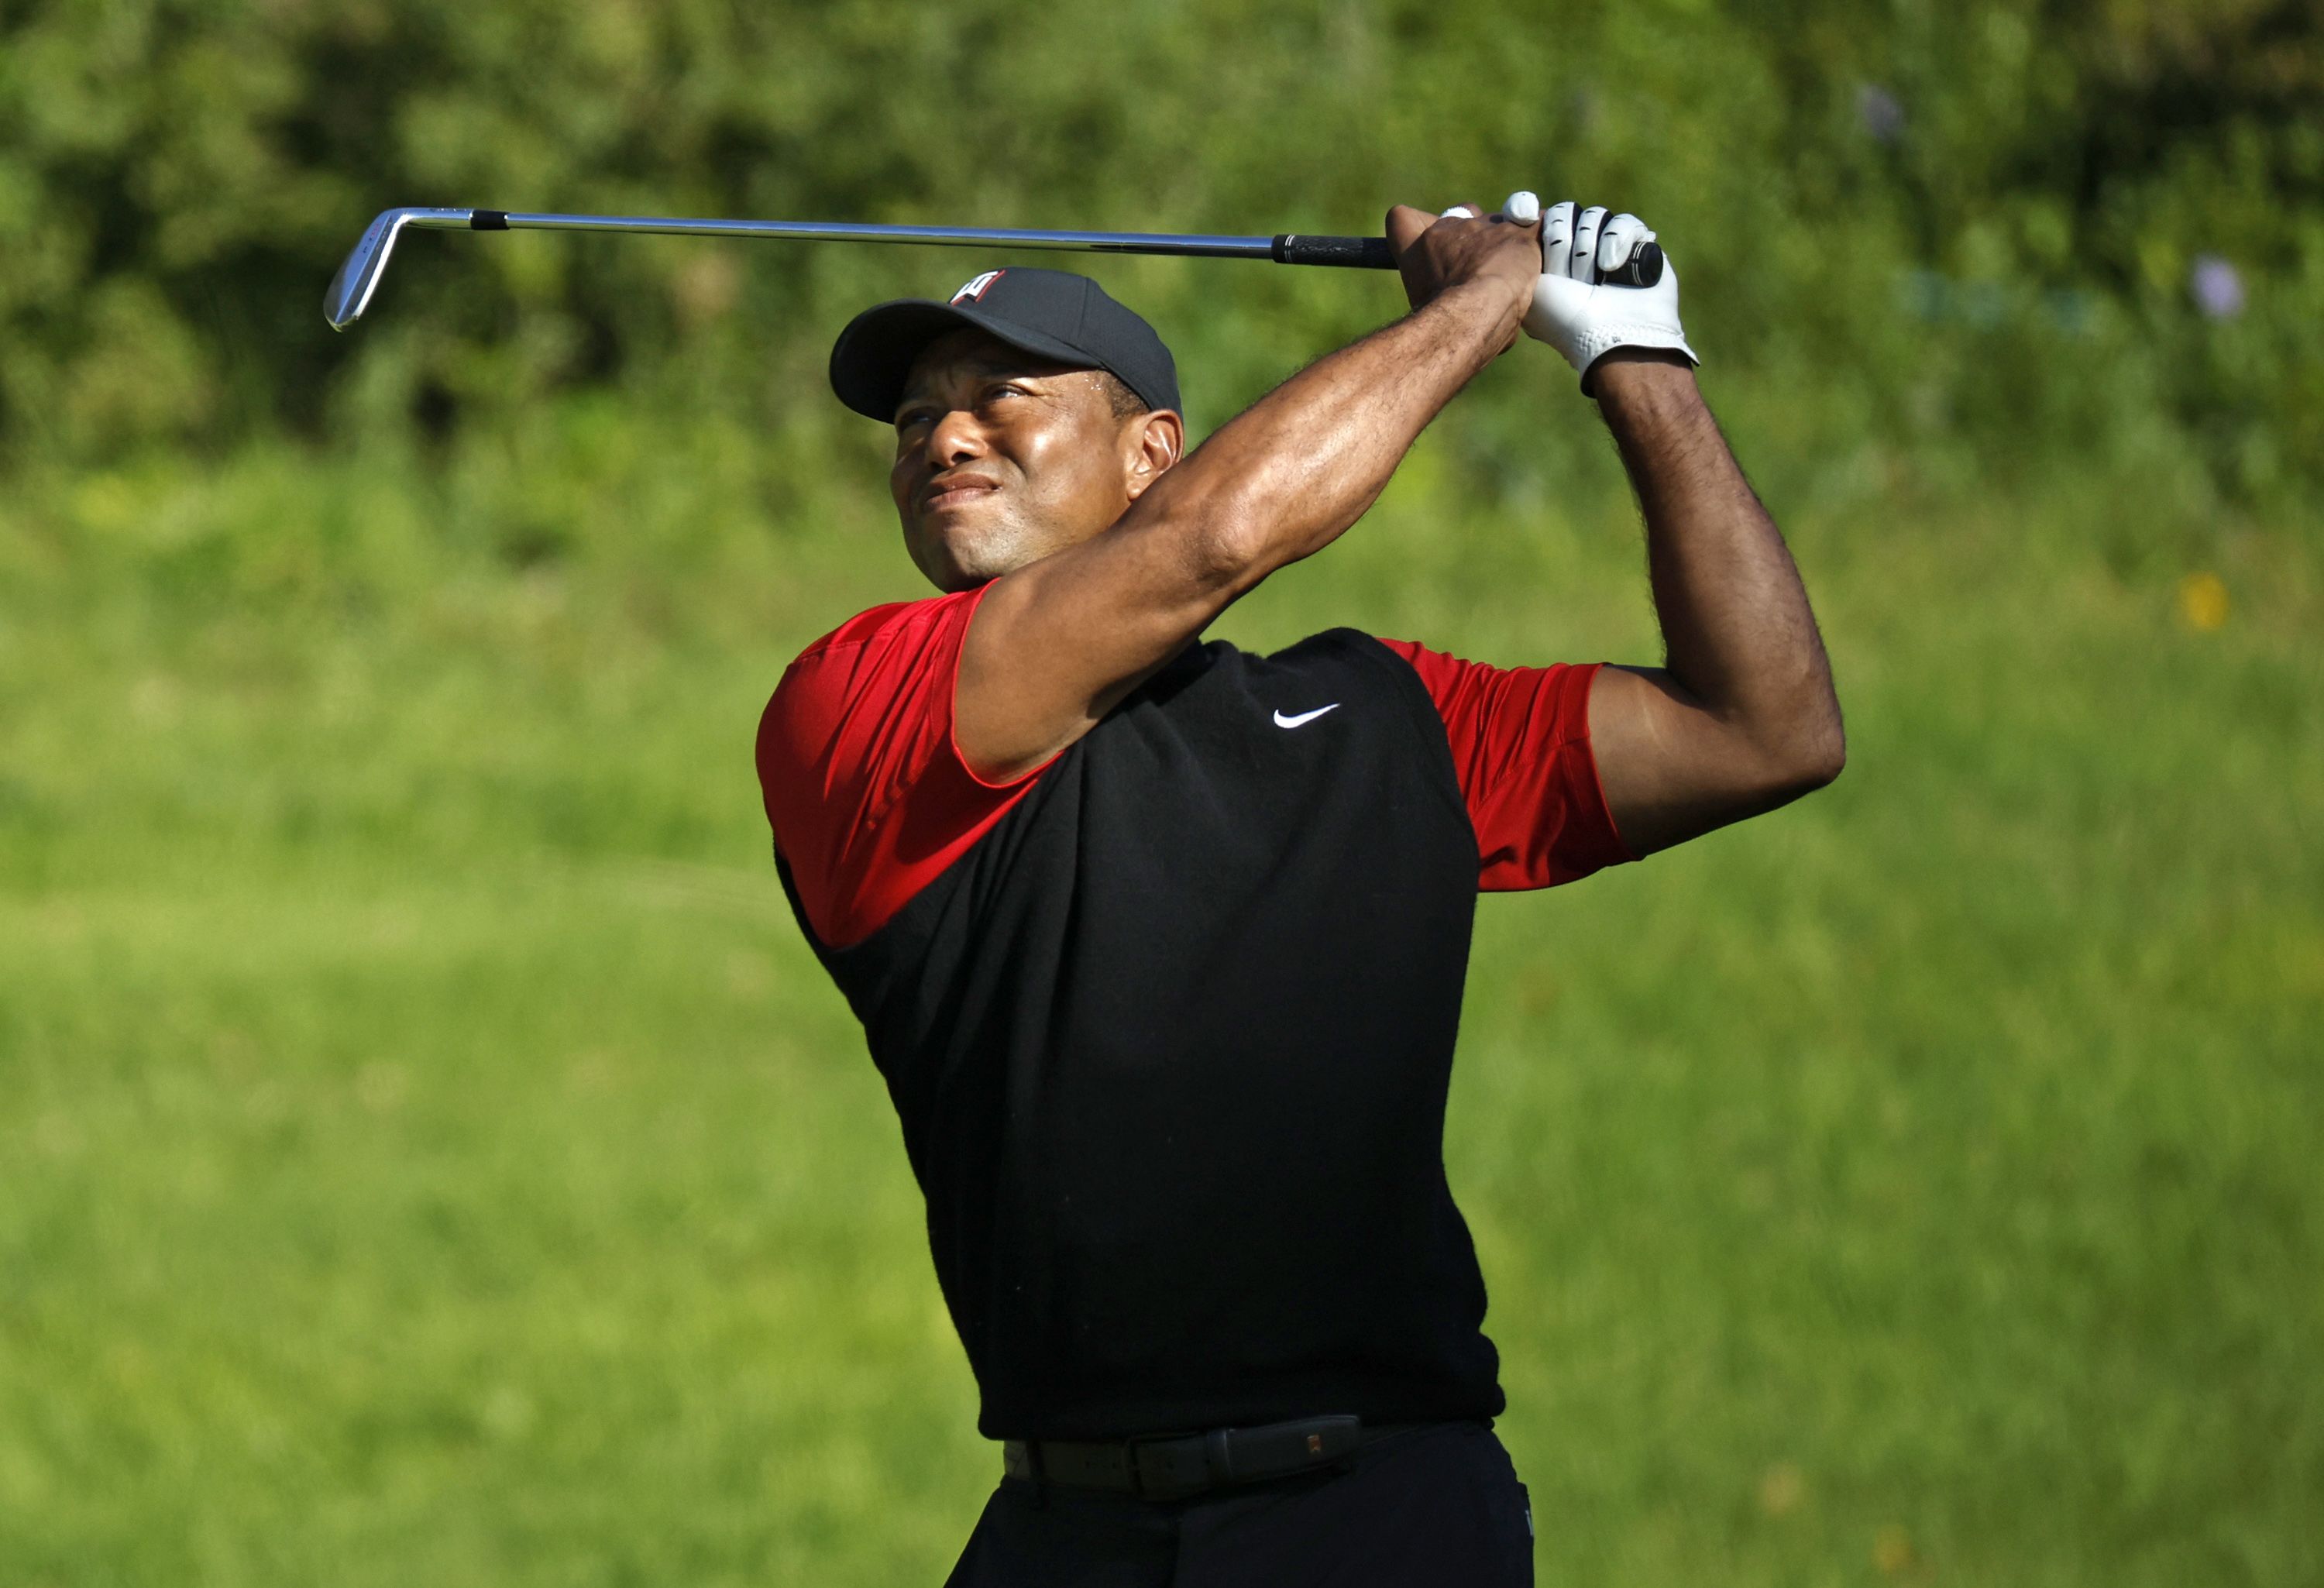 Tiger Woods Has Goal to Play in 2023 Masters Tournament: Source